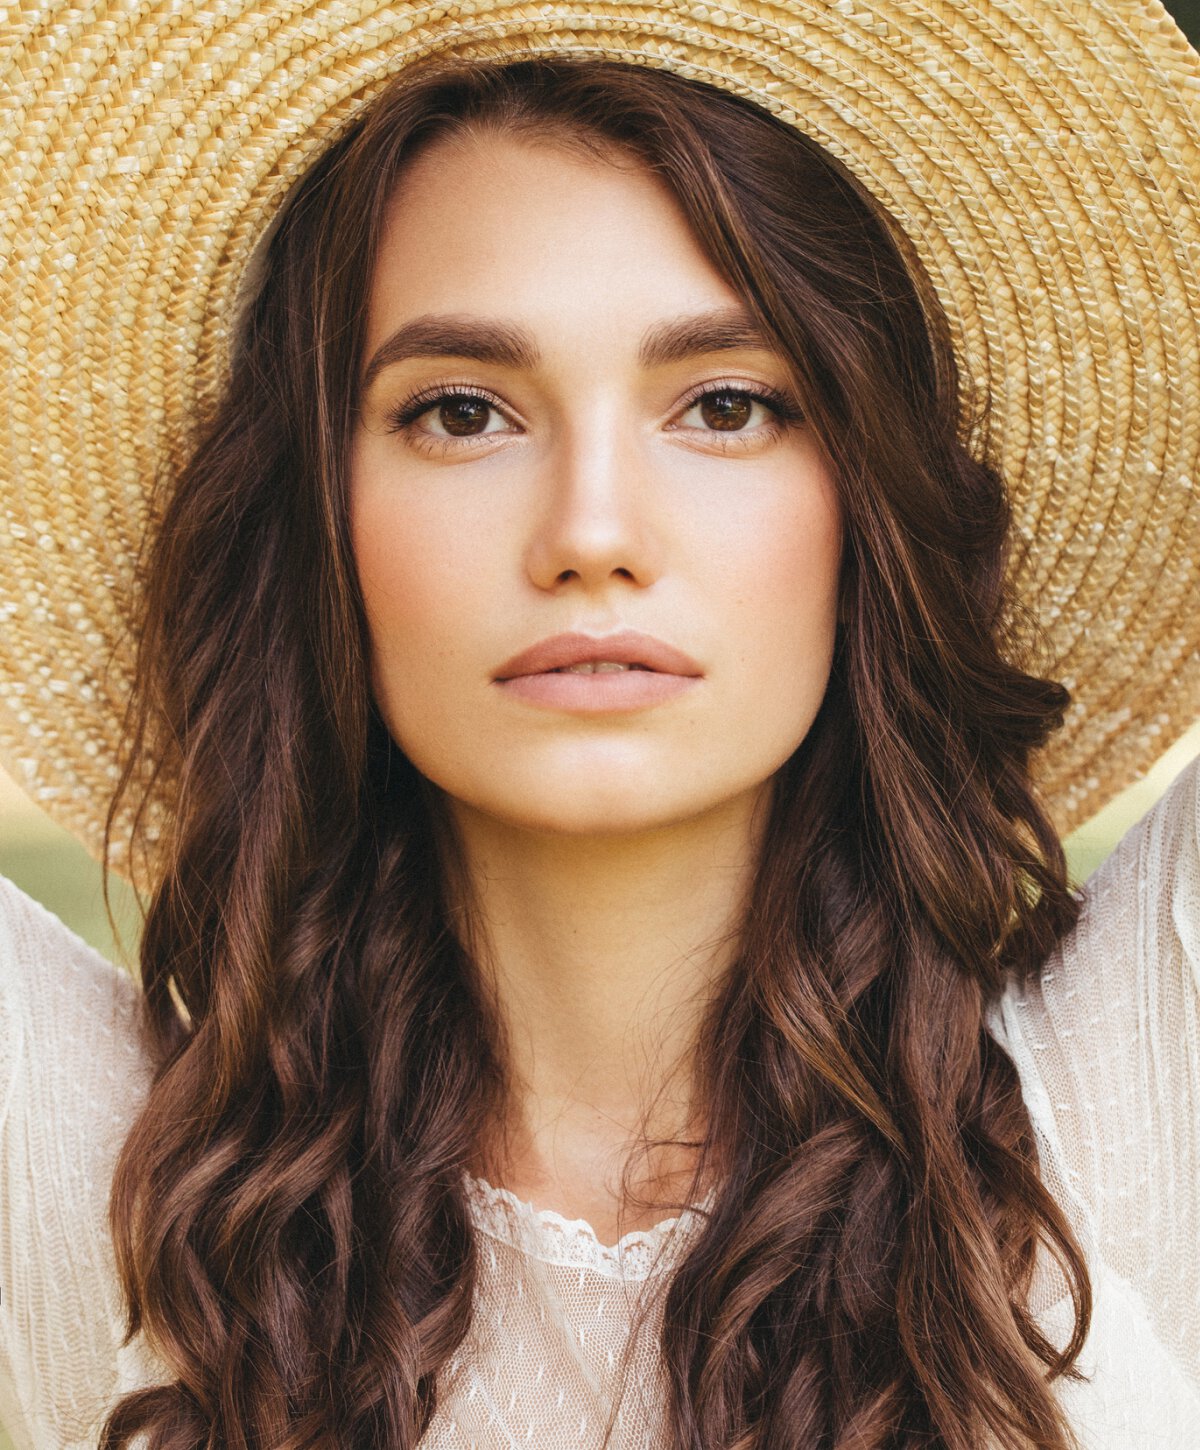 Los Angeles laser hair removal patient model wearing a wide-brimmed sun hat